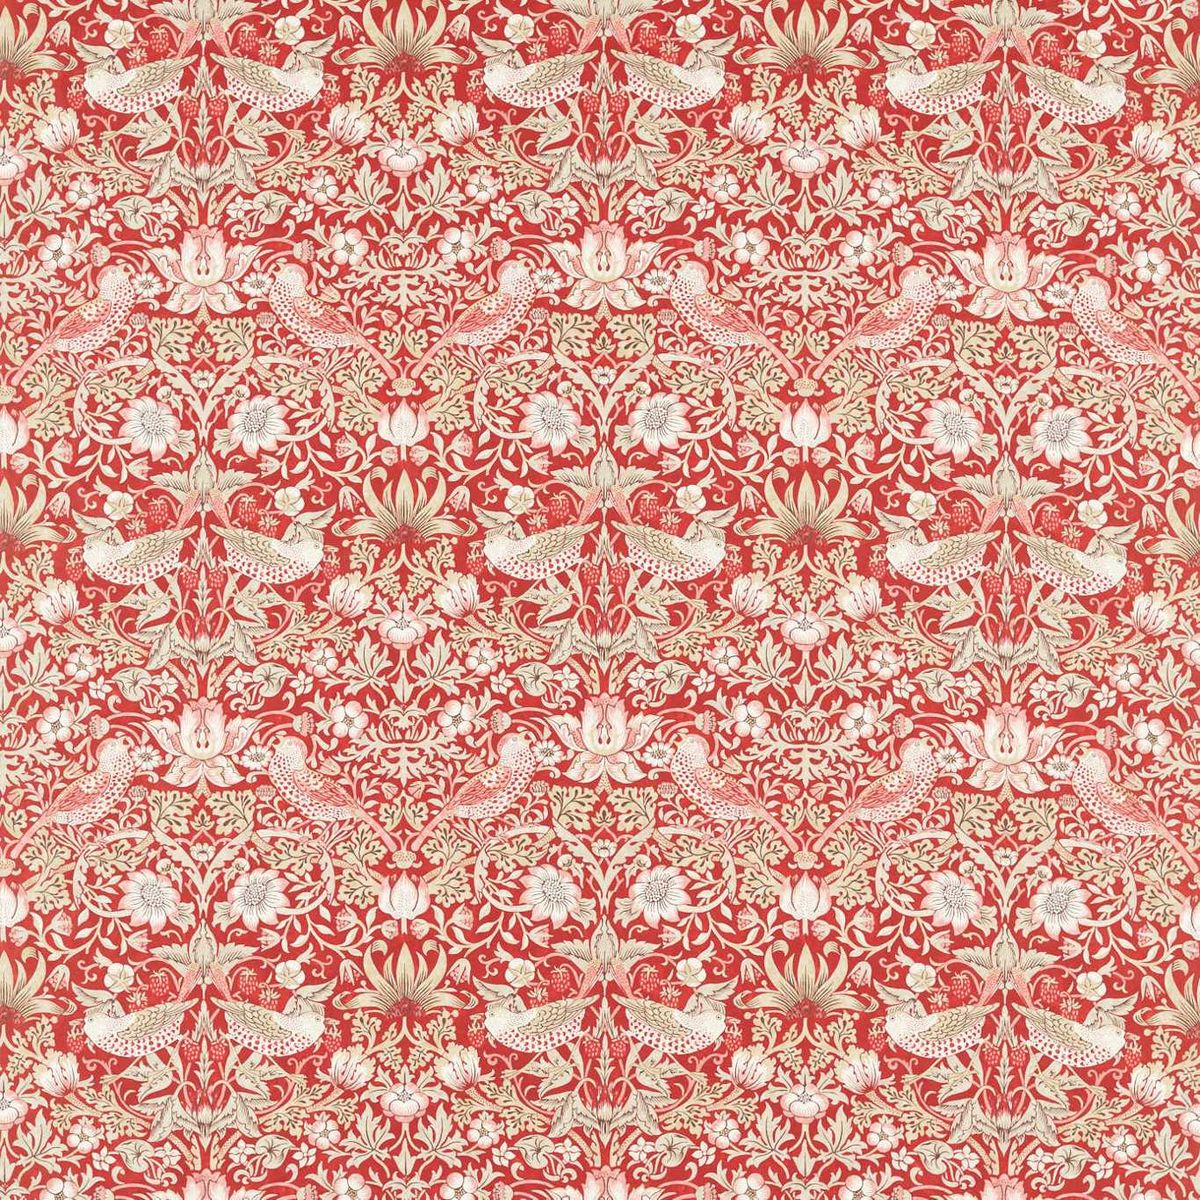 Strawberry Thief Indian Red Fabric by William Morris & Co.